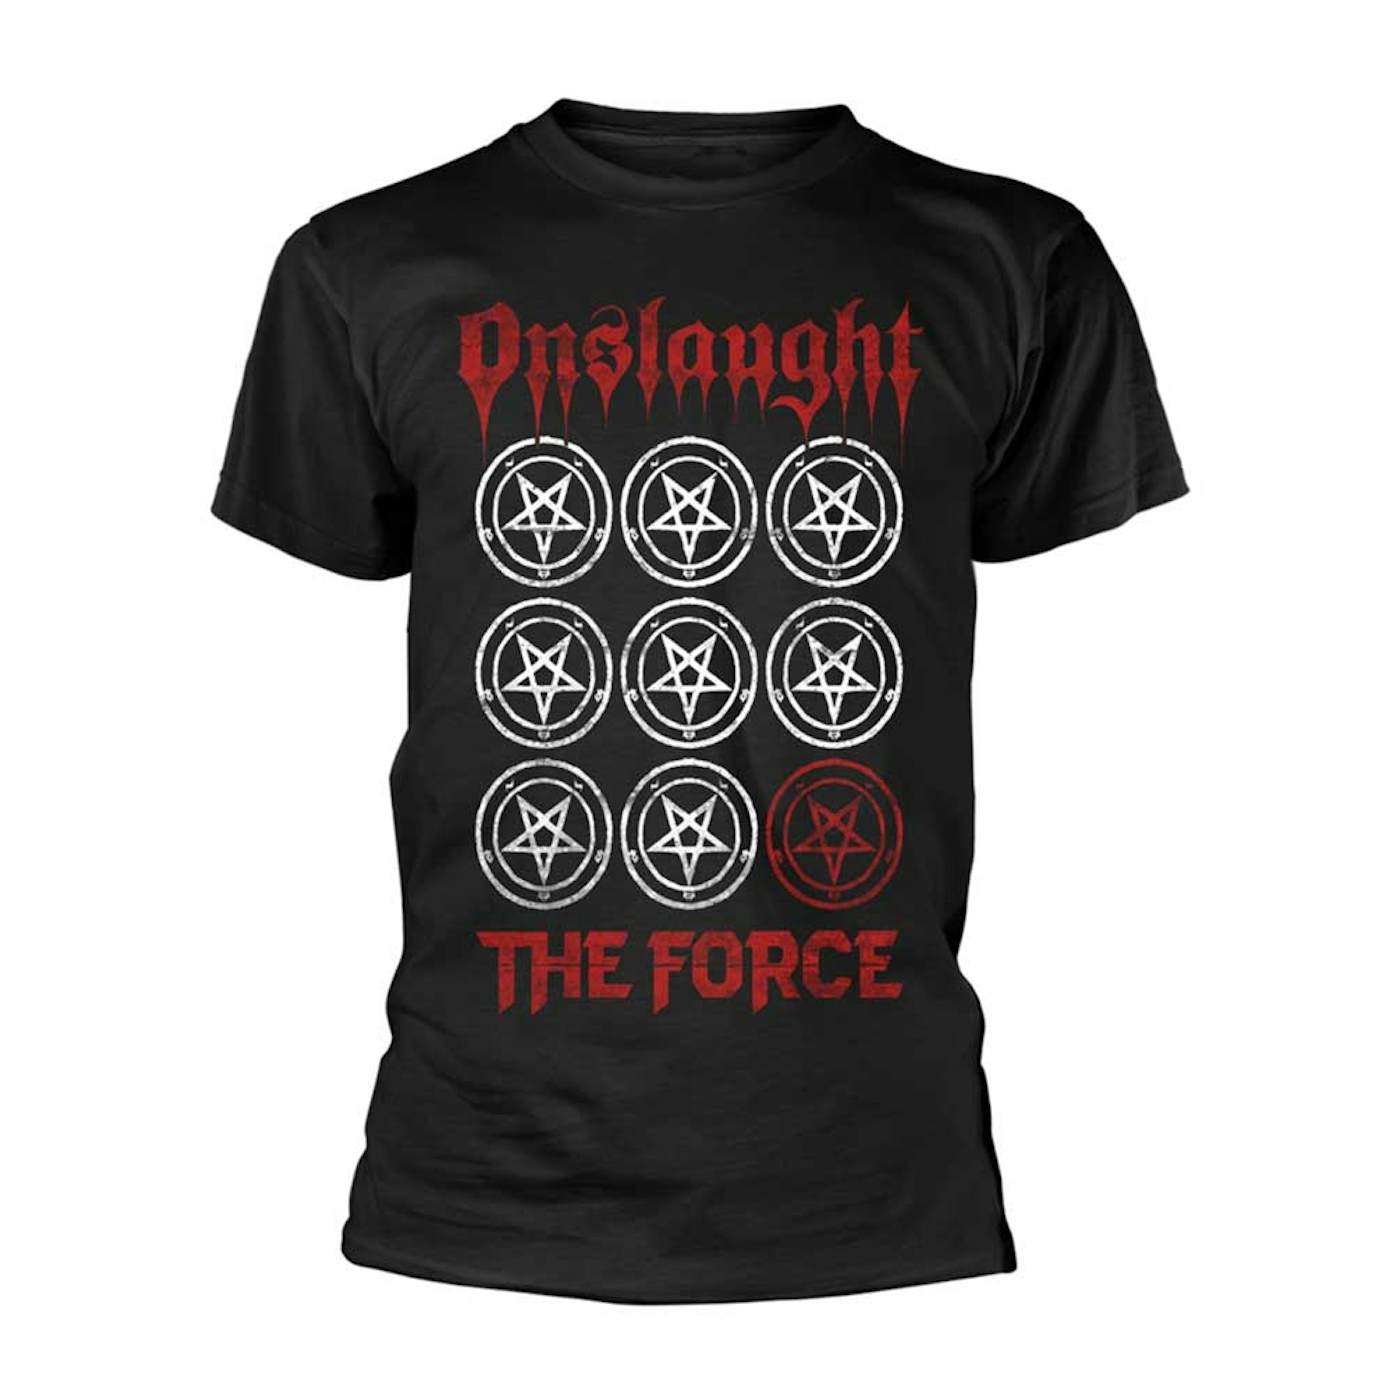 Onslaught T Shirt - The Force